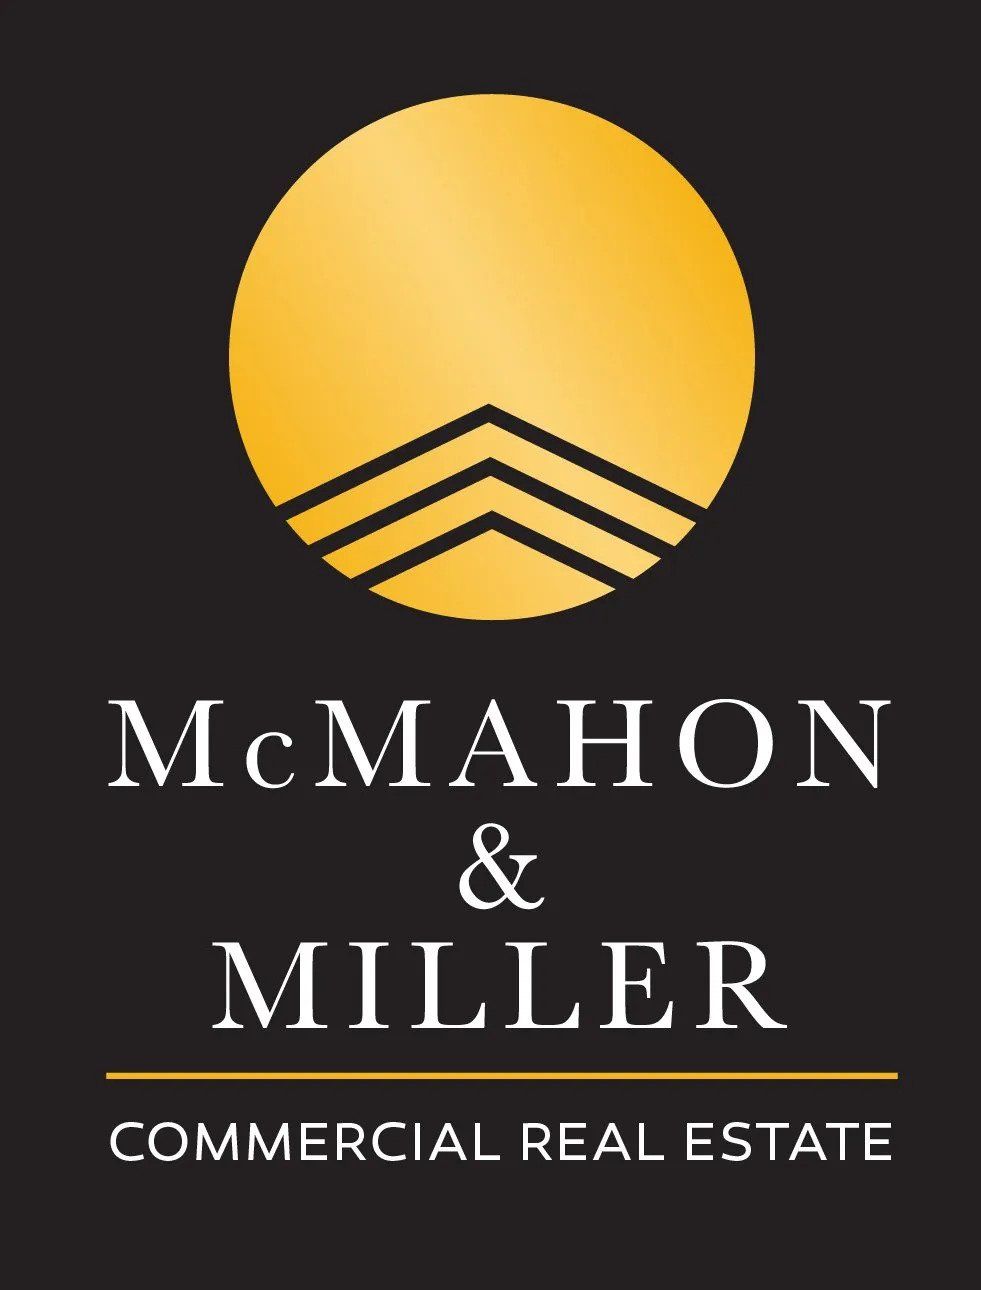 MCMAHON & MILLER COMMERCIAL REAL ESTATE